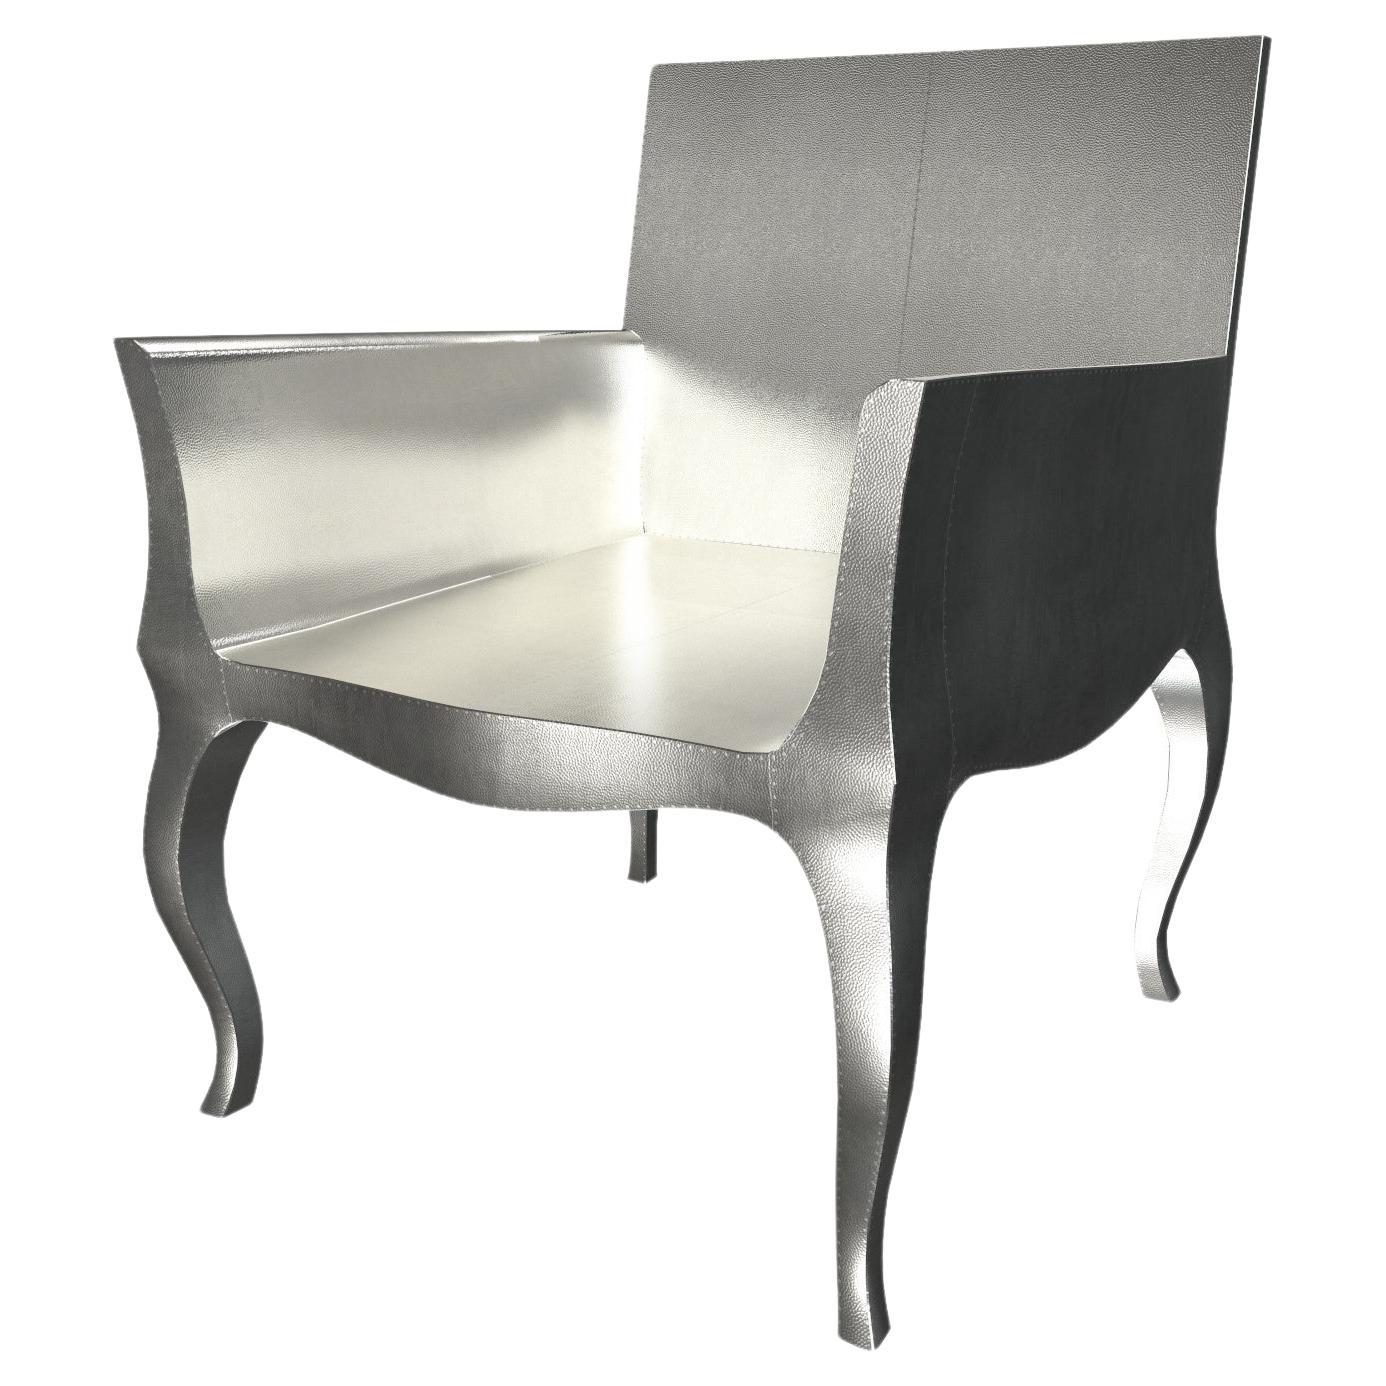 Art Deco Style Chairs Mid Hammered in White Bronze by Paul Mathieu